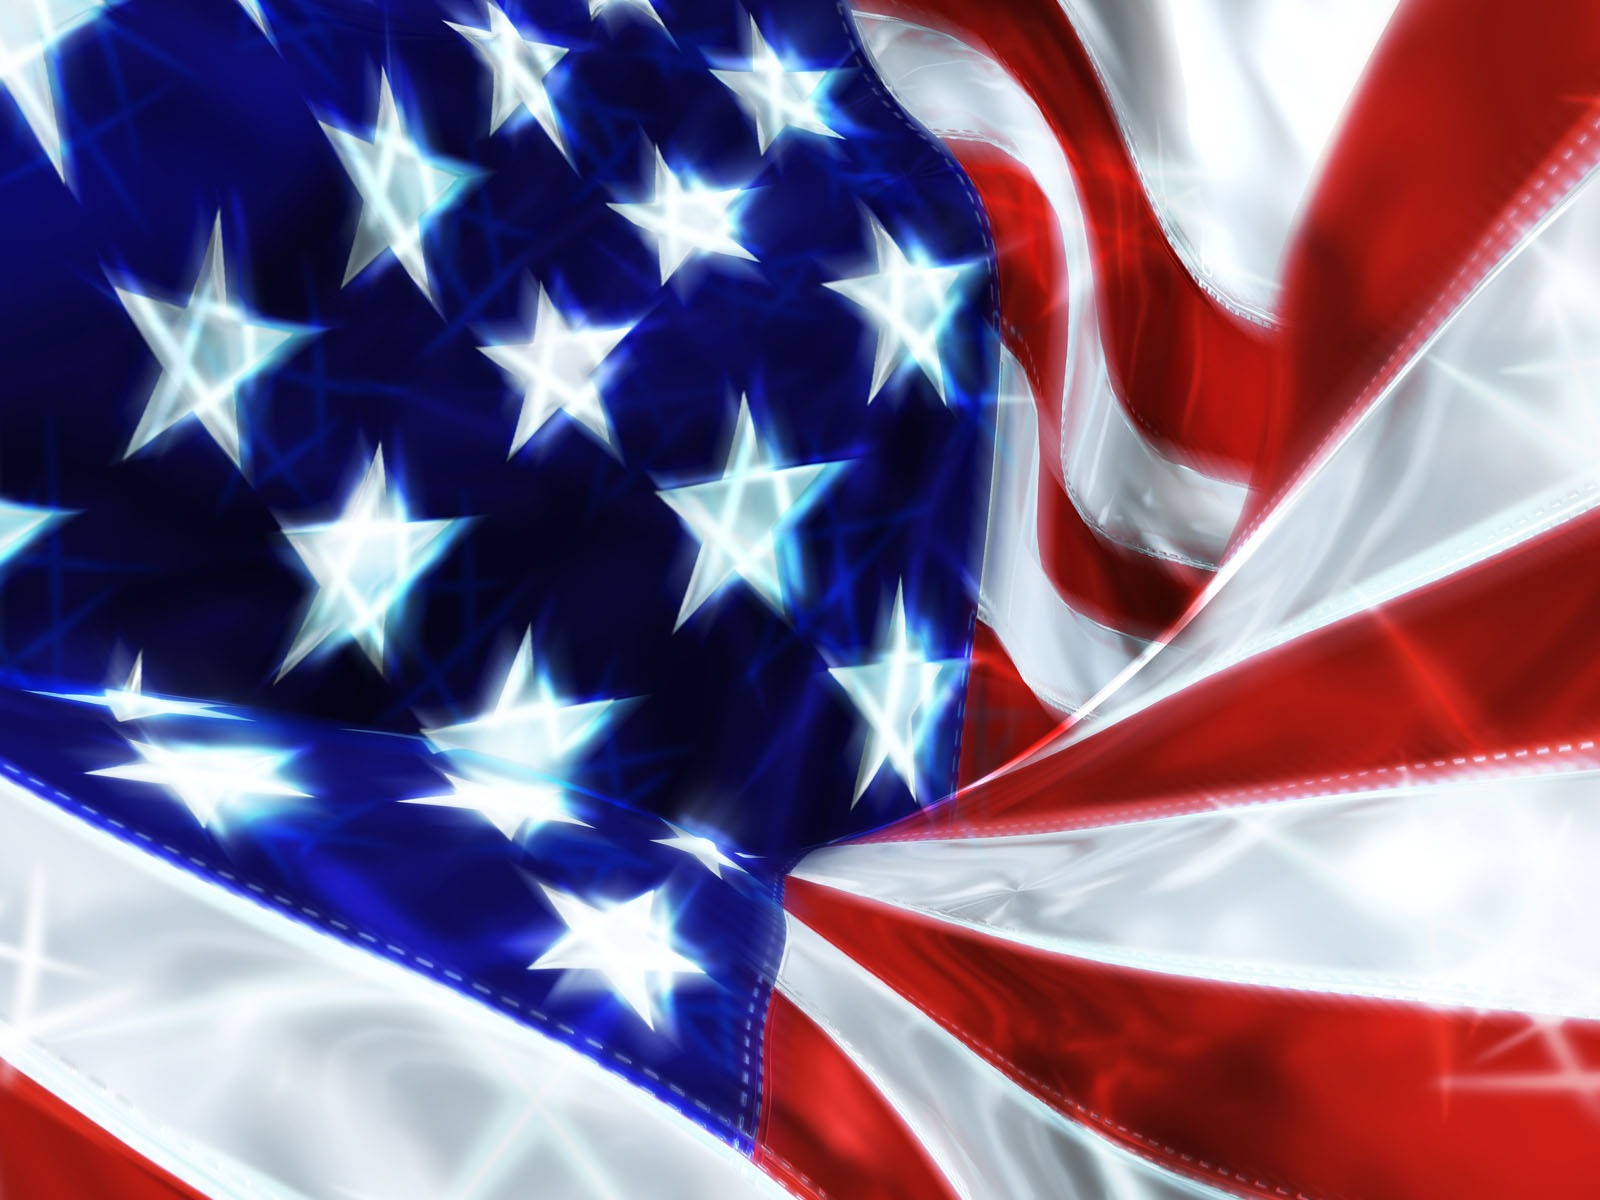 U.S. Independence Day theme wallpaper #4 - 1600x1200